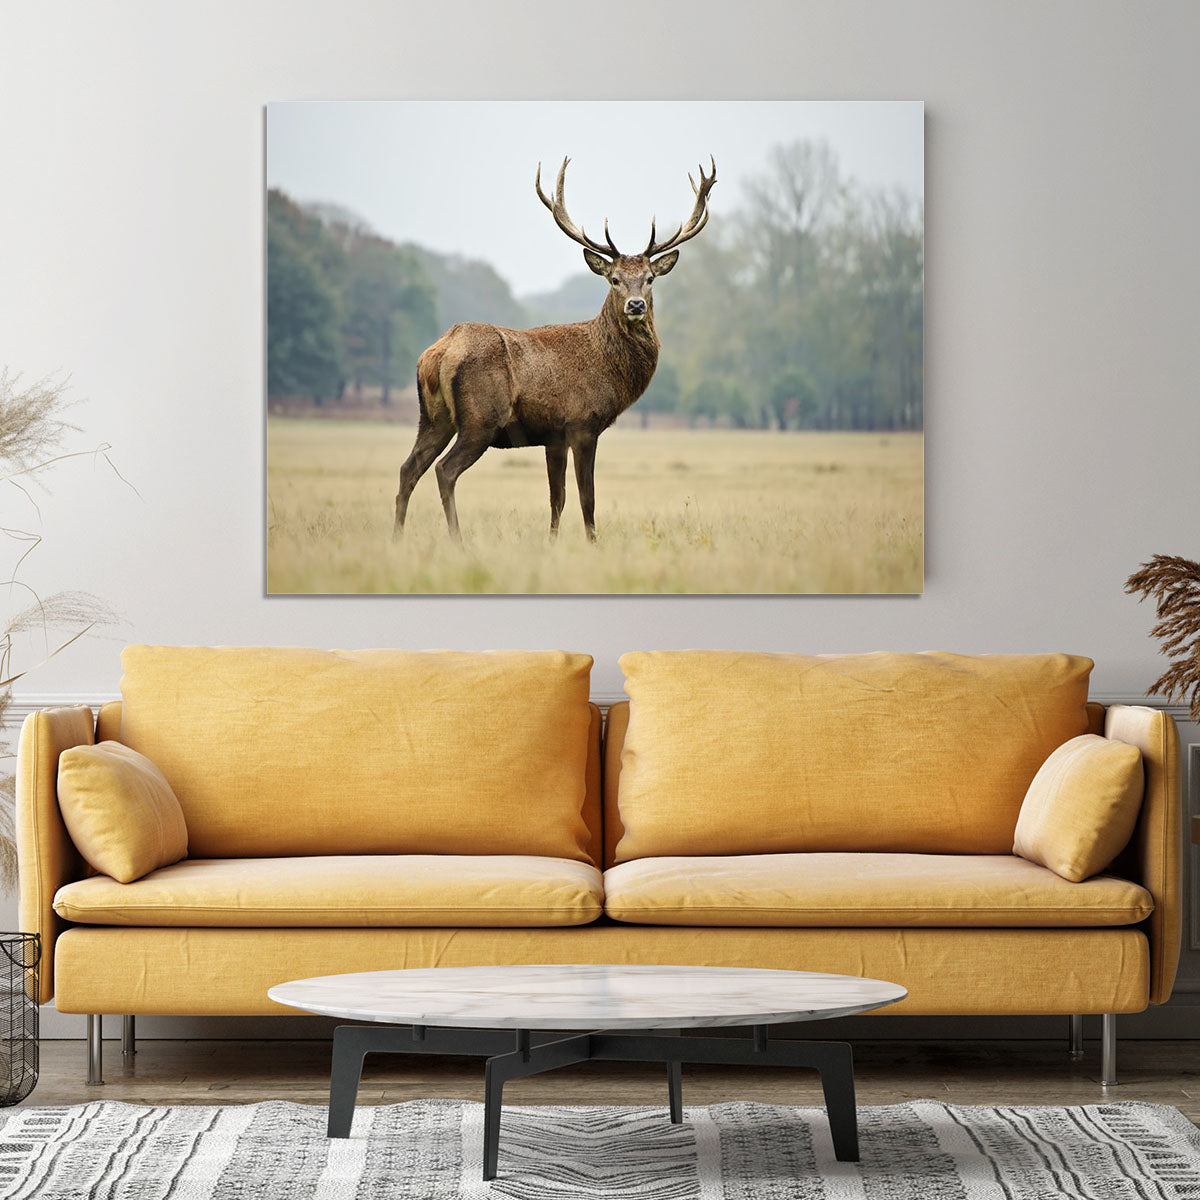 Portrait of adult red deer stag in field Canvas Print or Poster - Canvas Art Rocks - 4